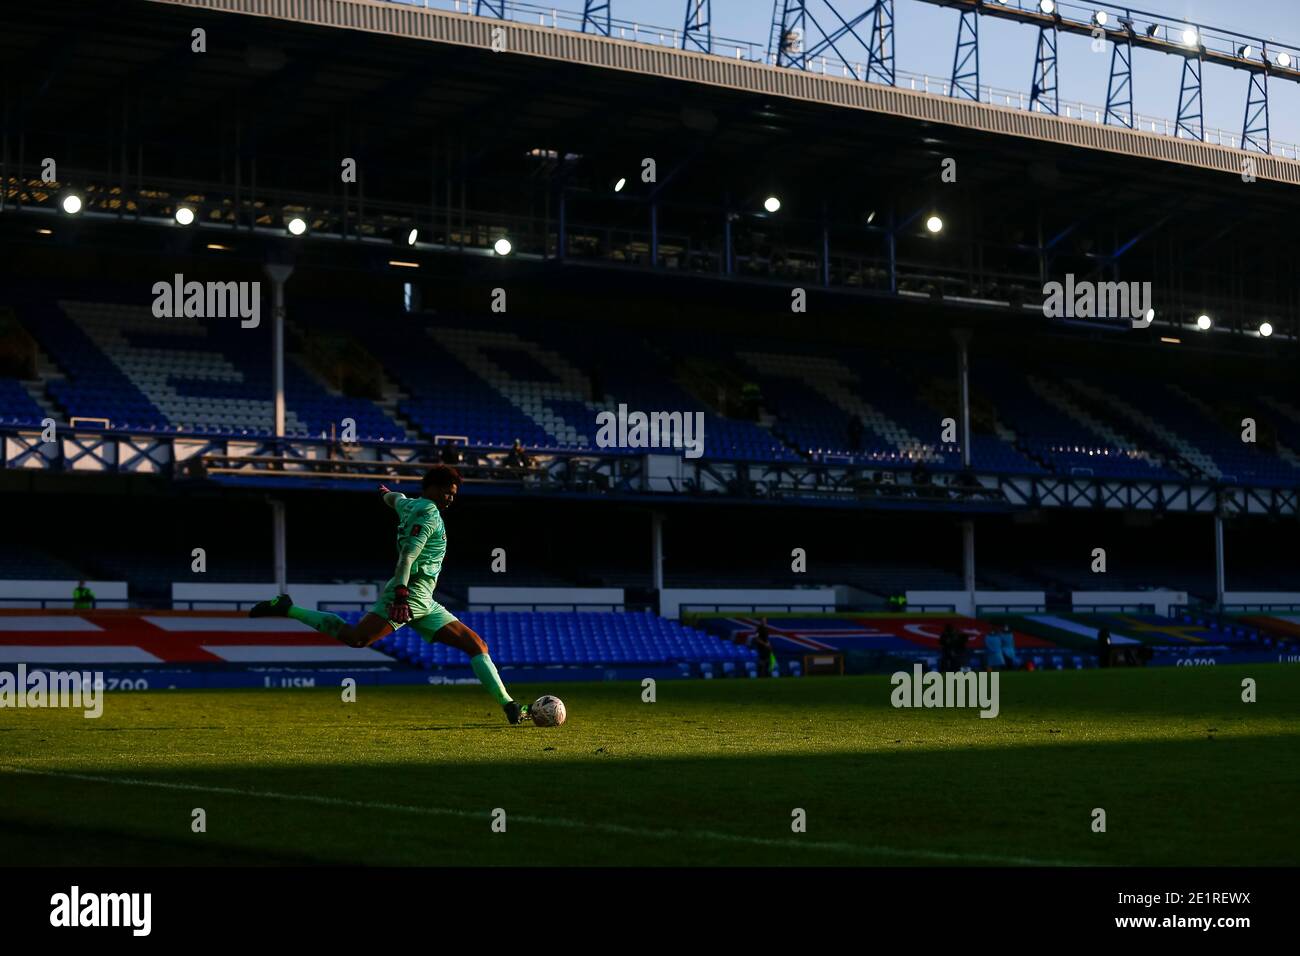 Liverpool, UK. 09th Jan, 2021. Jamal Blackman of Rotherham United takes a goal kick during the FA Cup Third Round match between Everton and Rotherham United at Goodison Park on January 9th 2021 in Liverpool, England. (Photo by Daniel Chesterton/phcimages.com) Credit: PHC Images/Alamy Live News Stock Photo